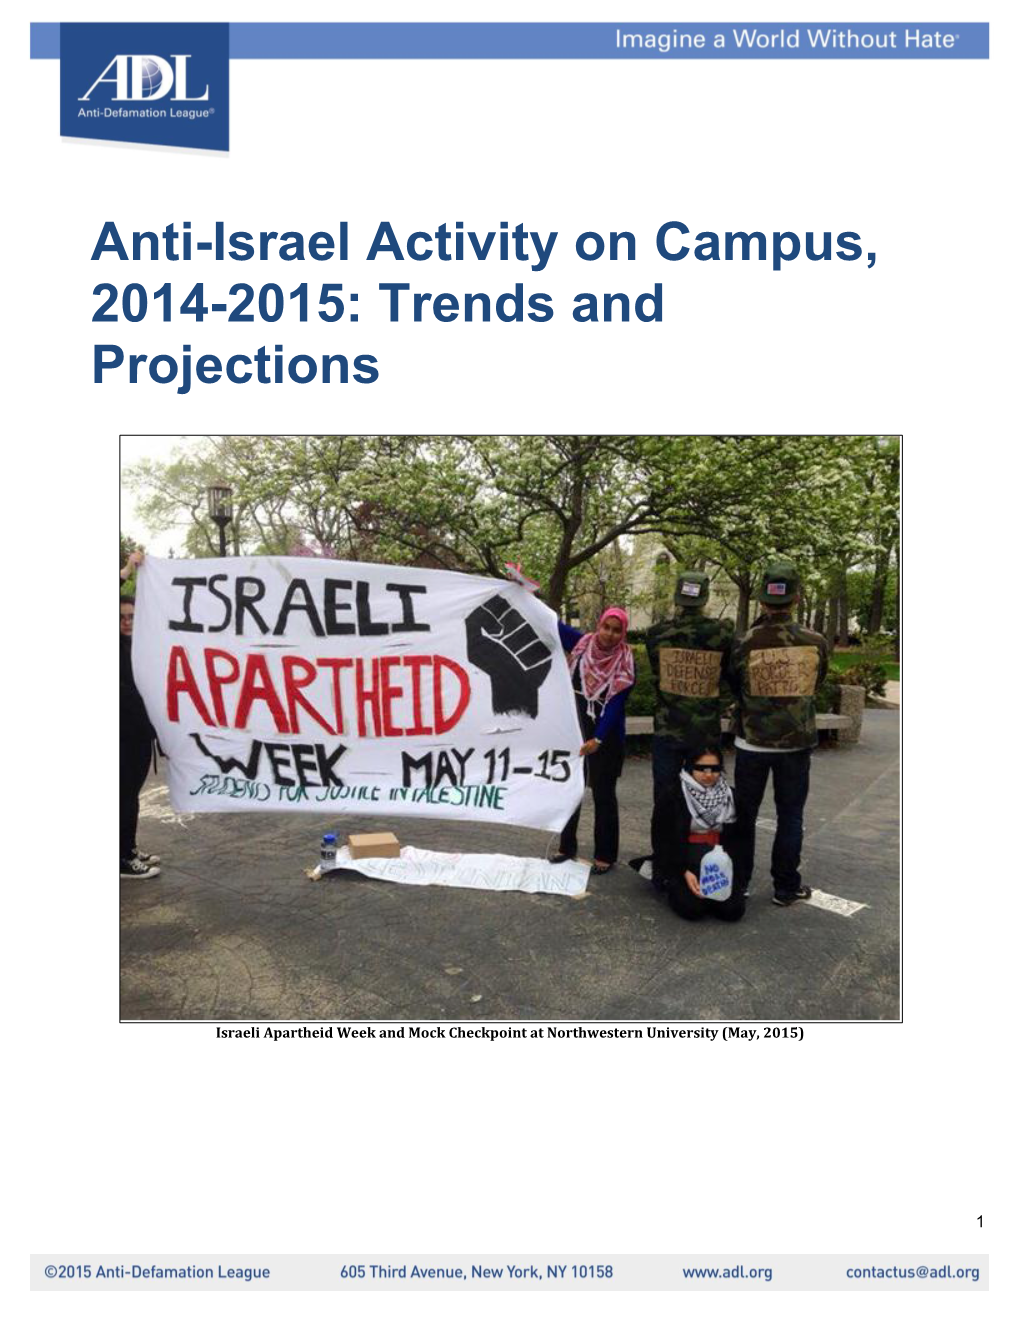 Anti-Israel Activity on Campus, 2014-2015: Trends and Projections